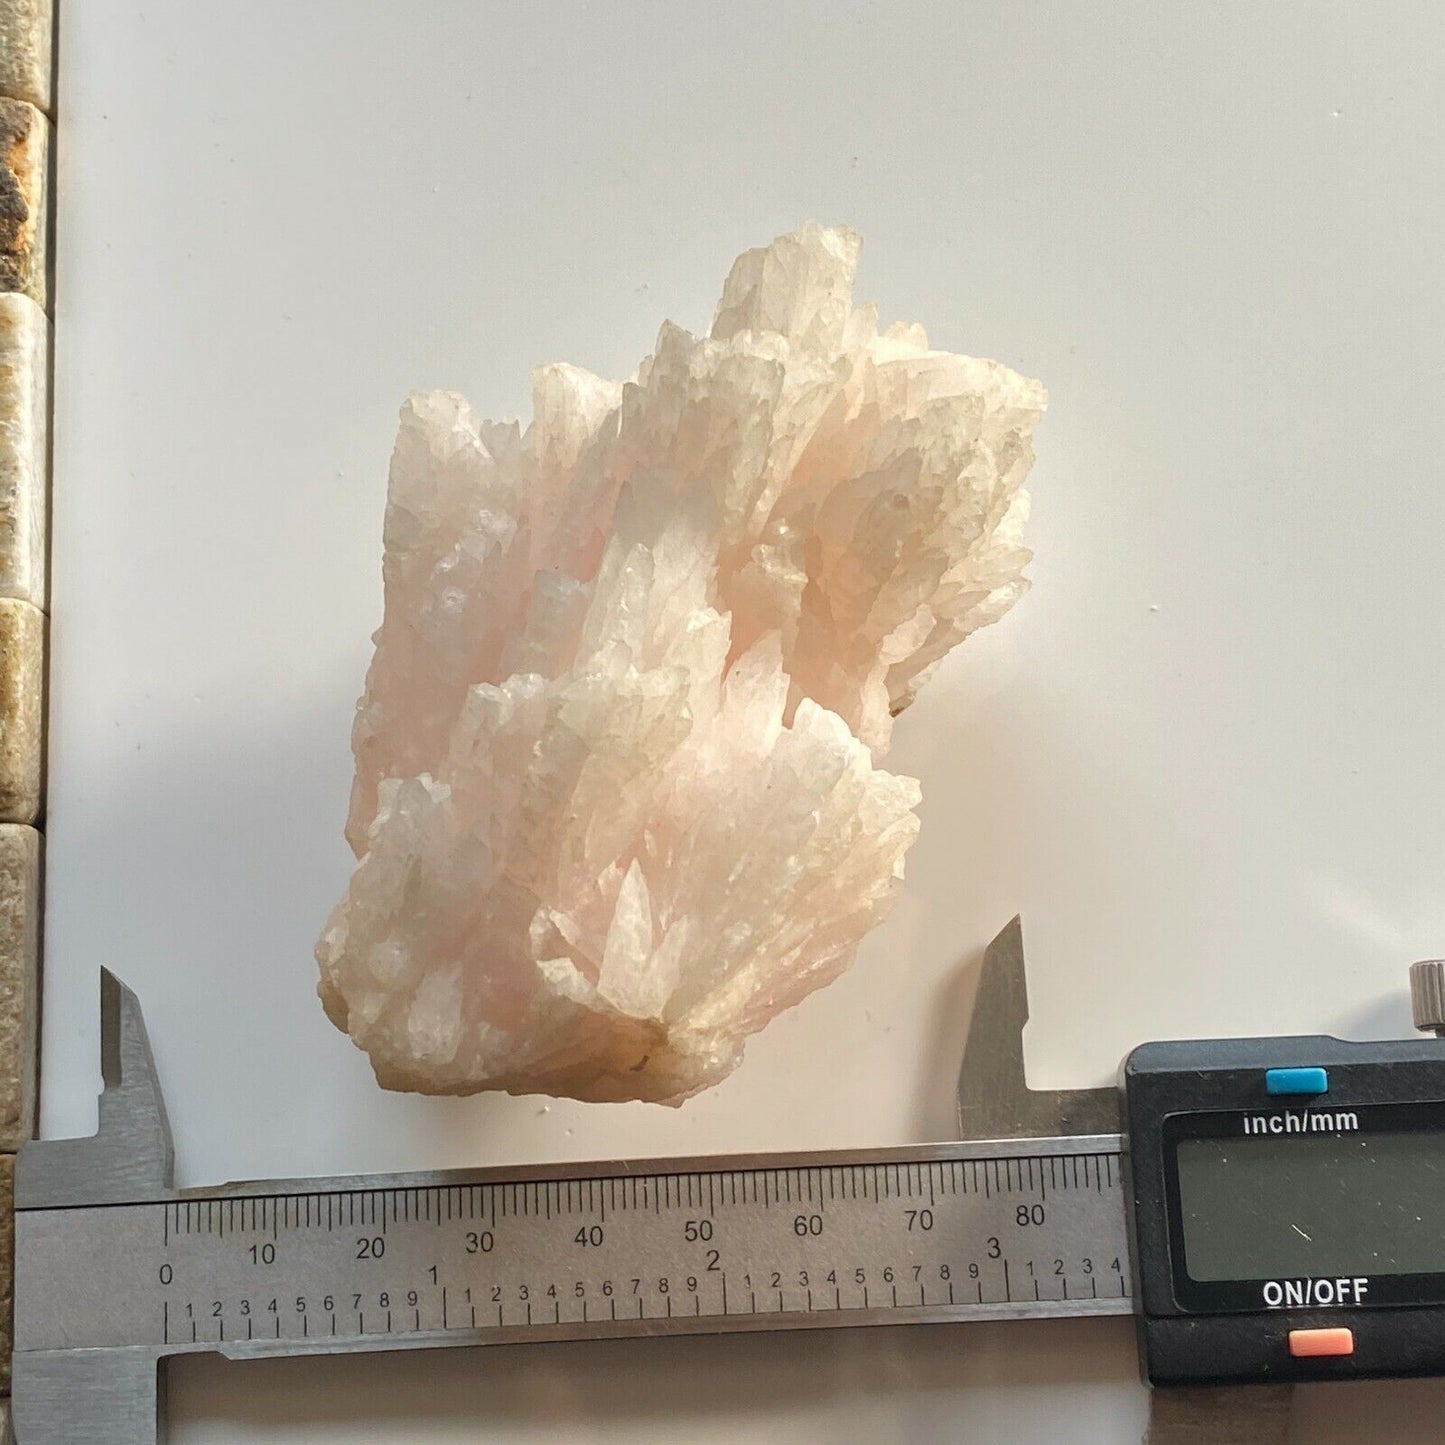 CALCITE EXCEPTIONAL SPECIMEN FROM THE MENDIPS SOMERSET 203g MF240